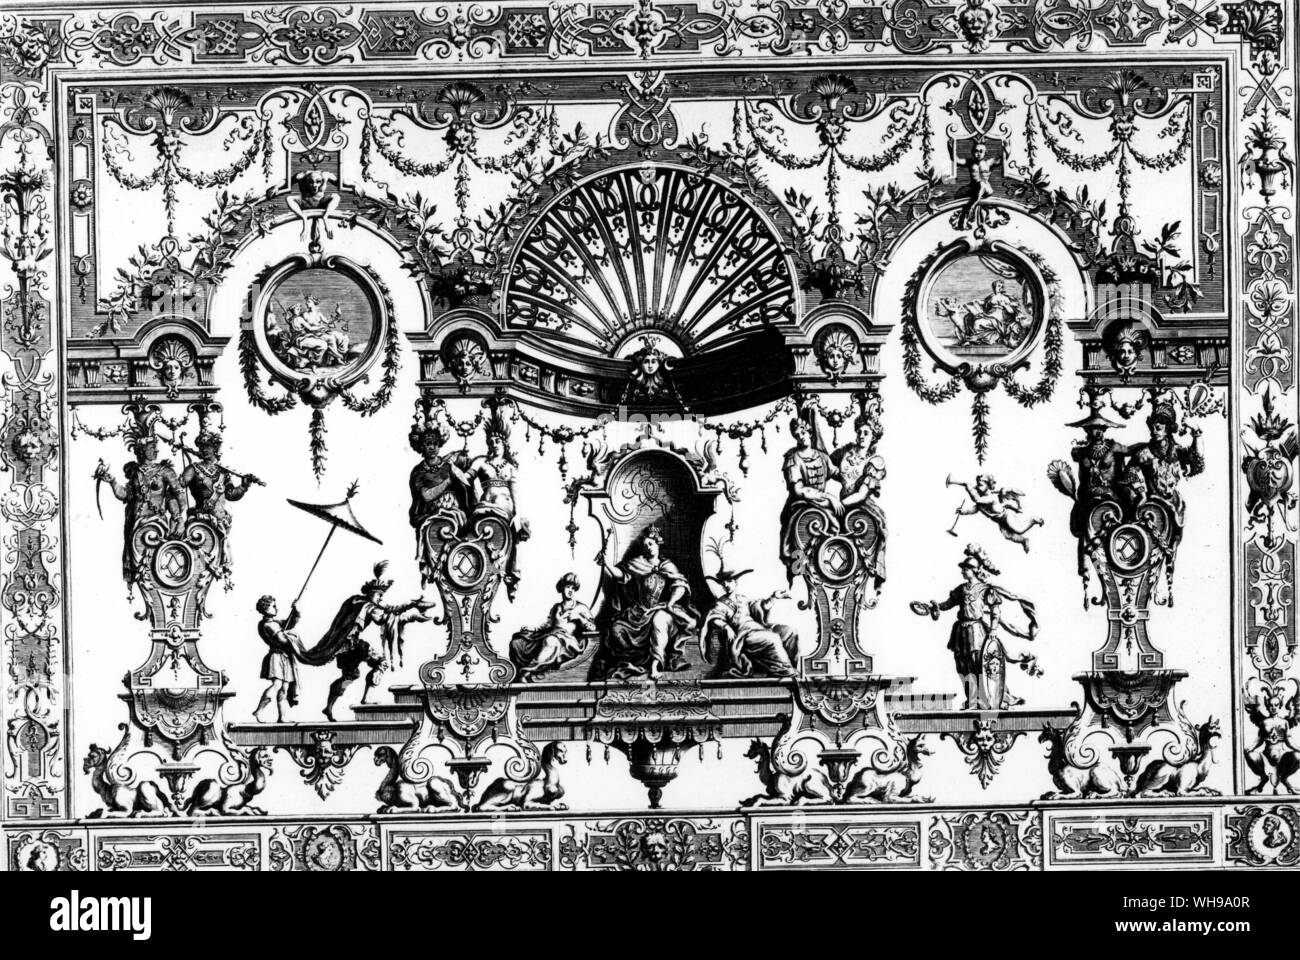 Grotesque panel designed by Berain with chinoiserie elements appearing in a somewhat subdued form: see the figure under the parasol and the caryatids on the extreme right and left. Stock Photo